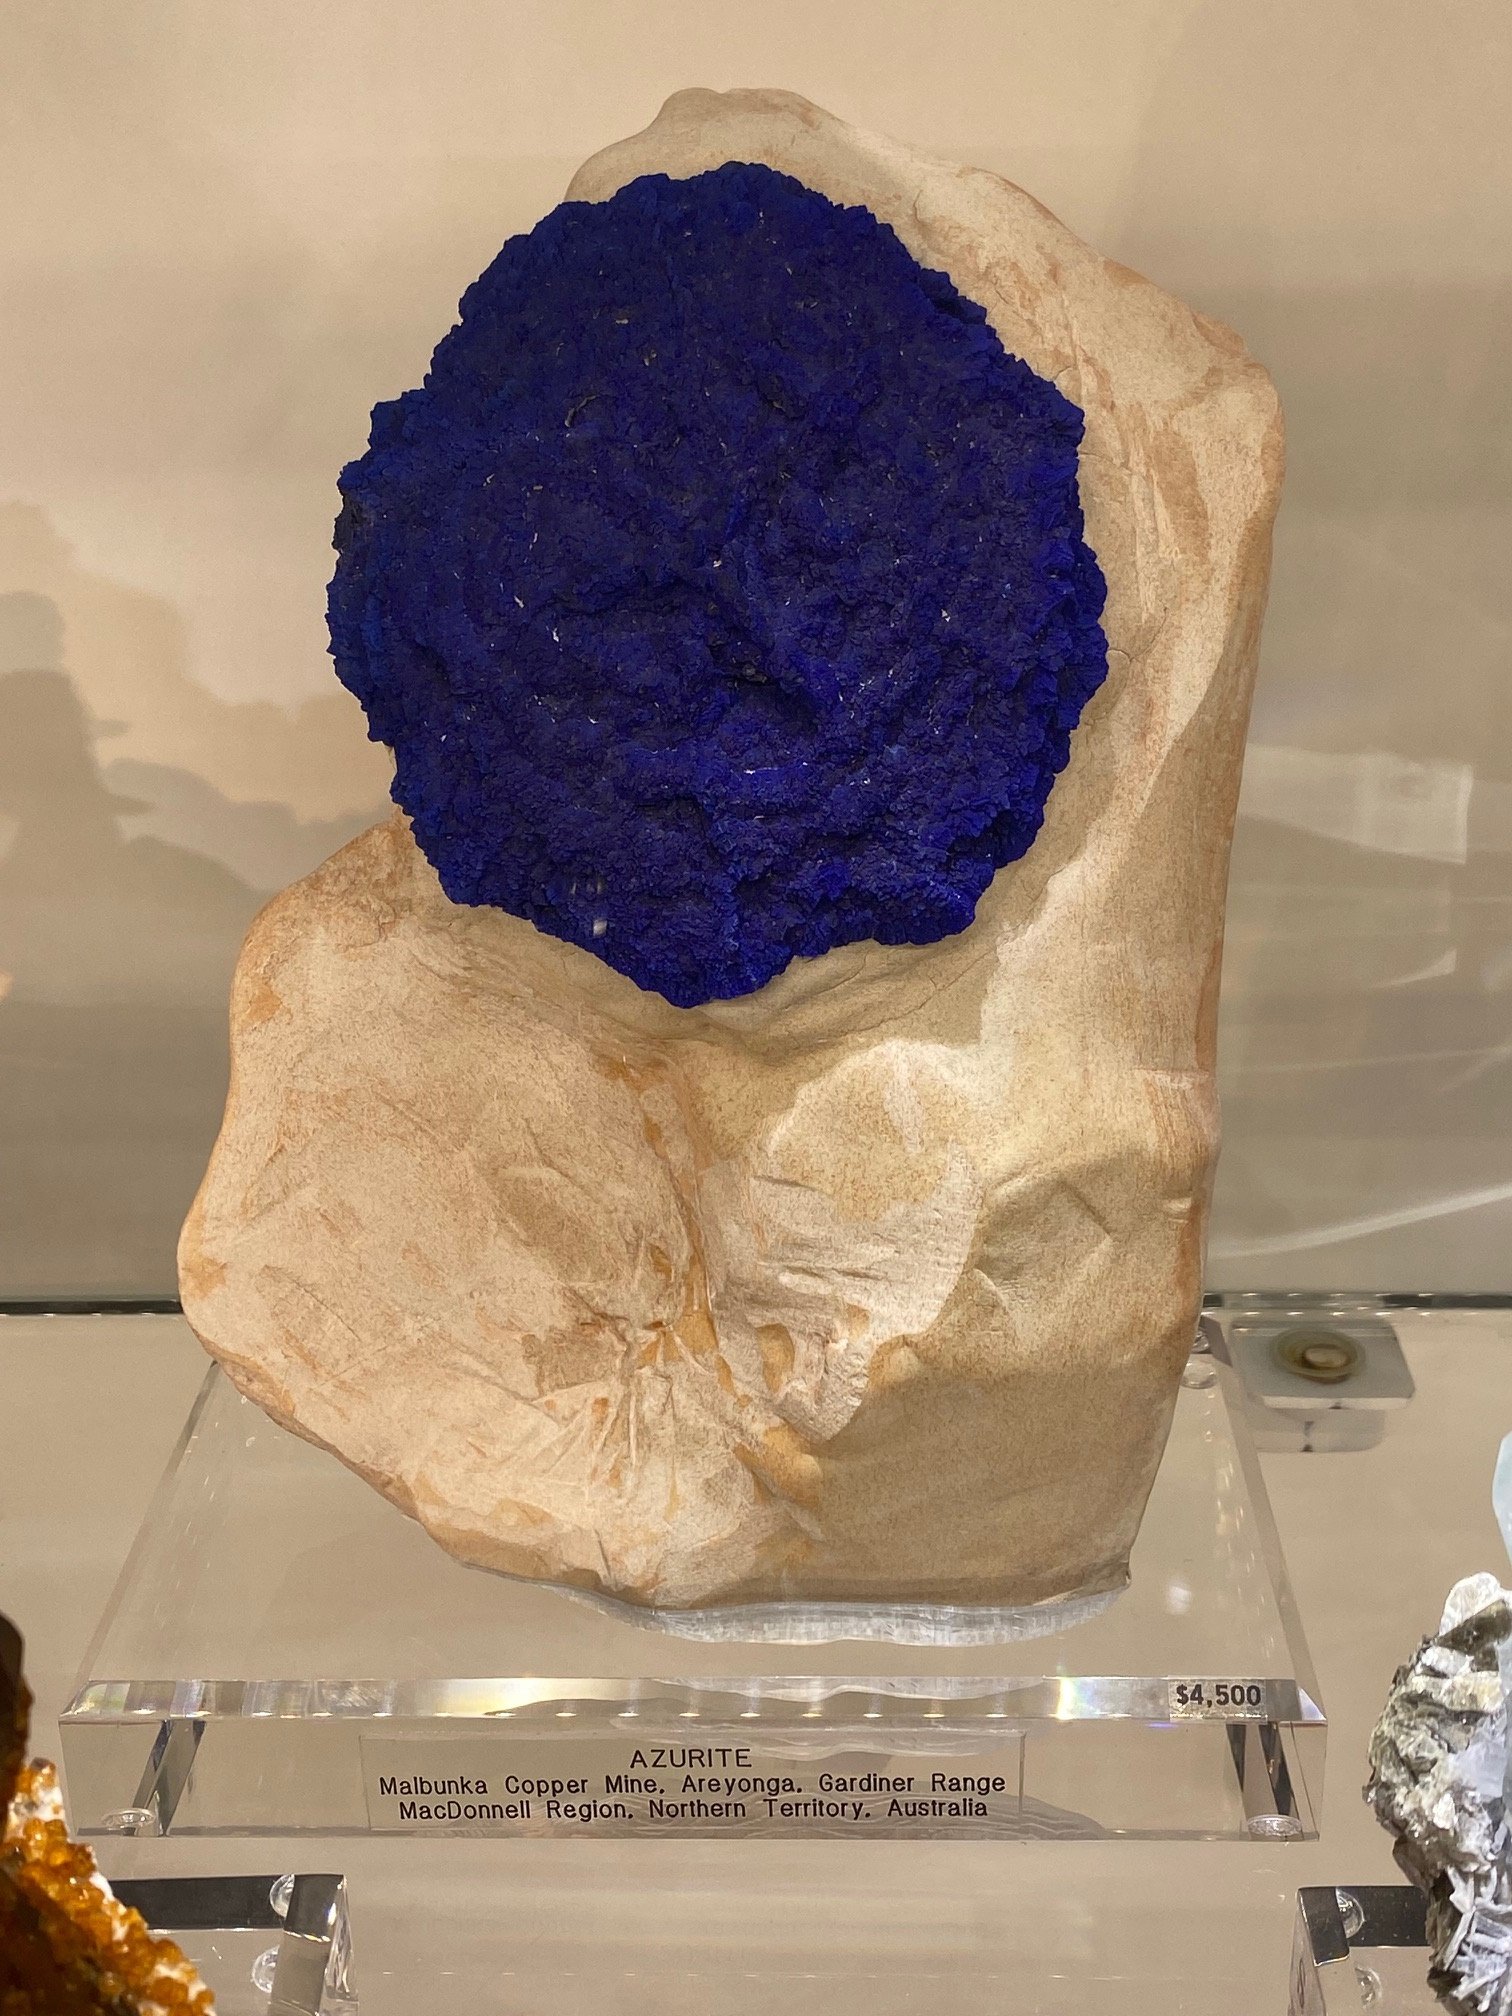 These Azurite Suns are so neat